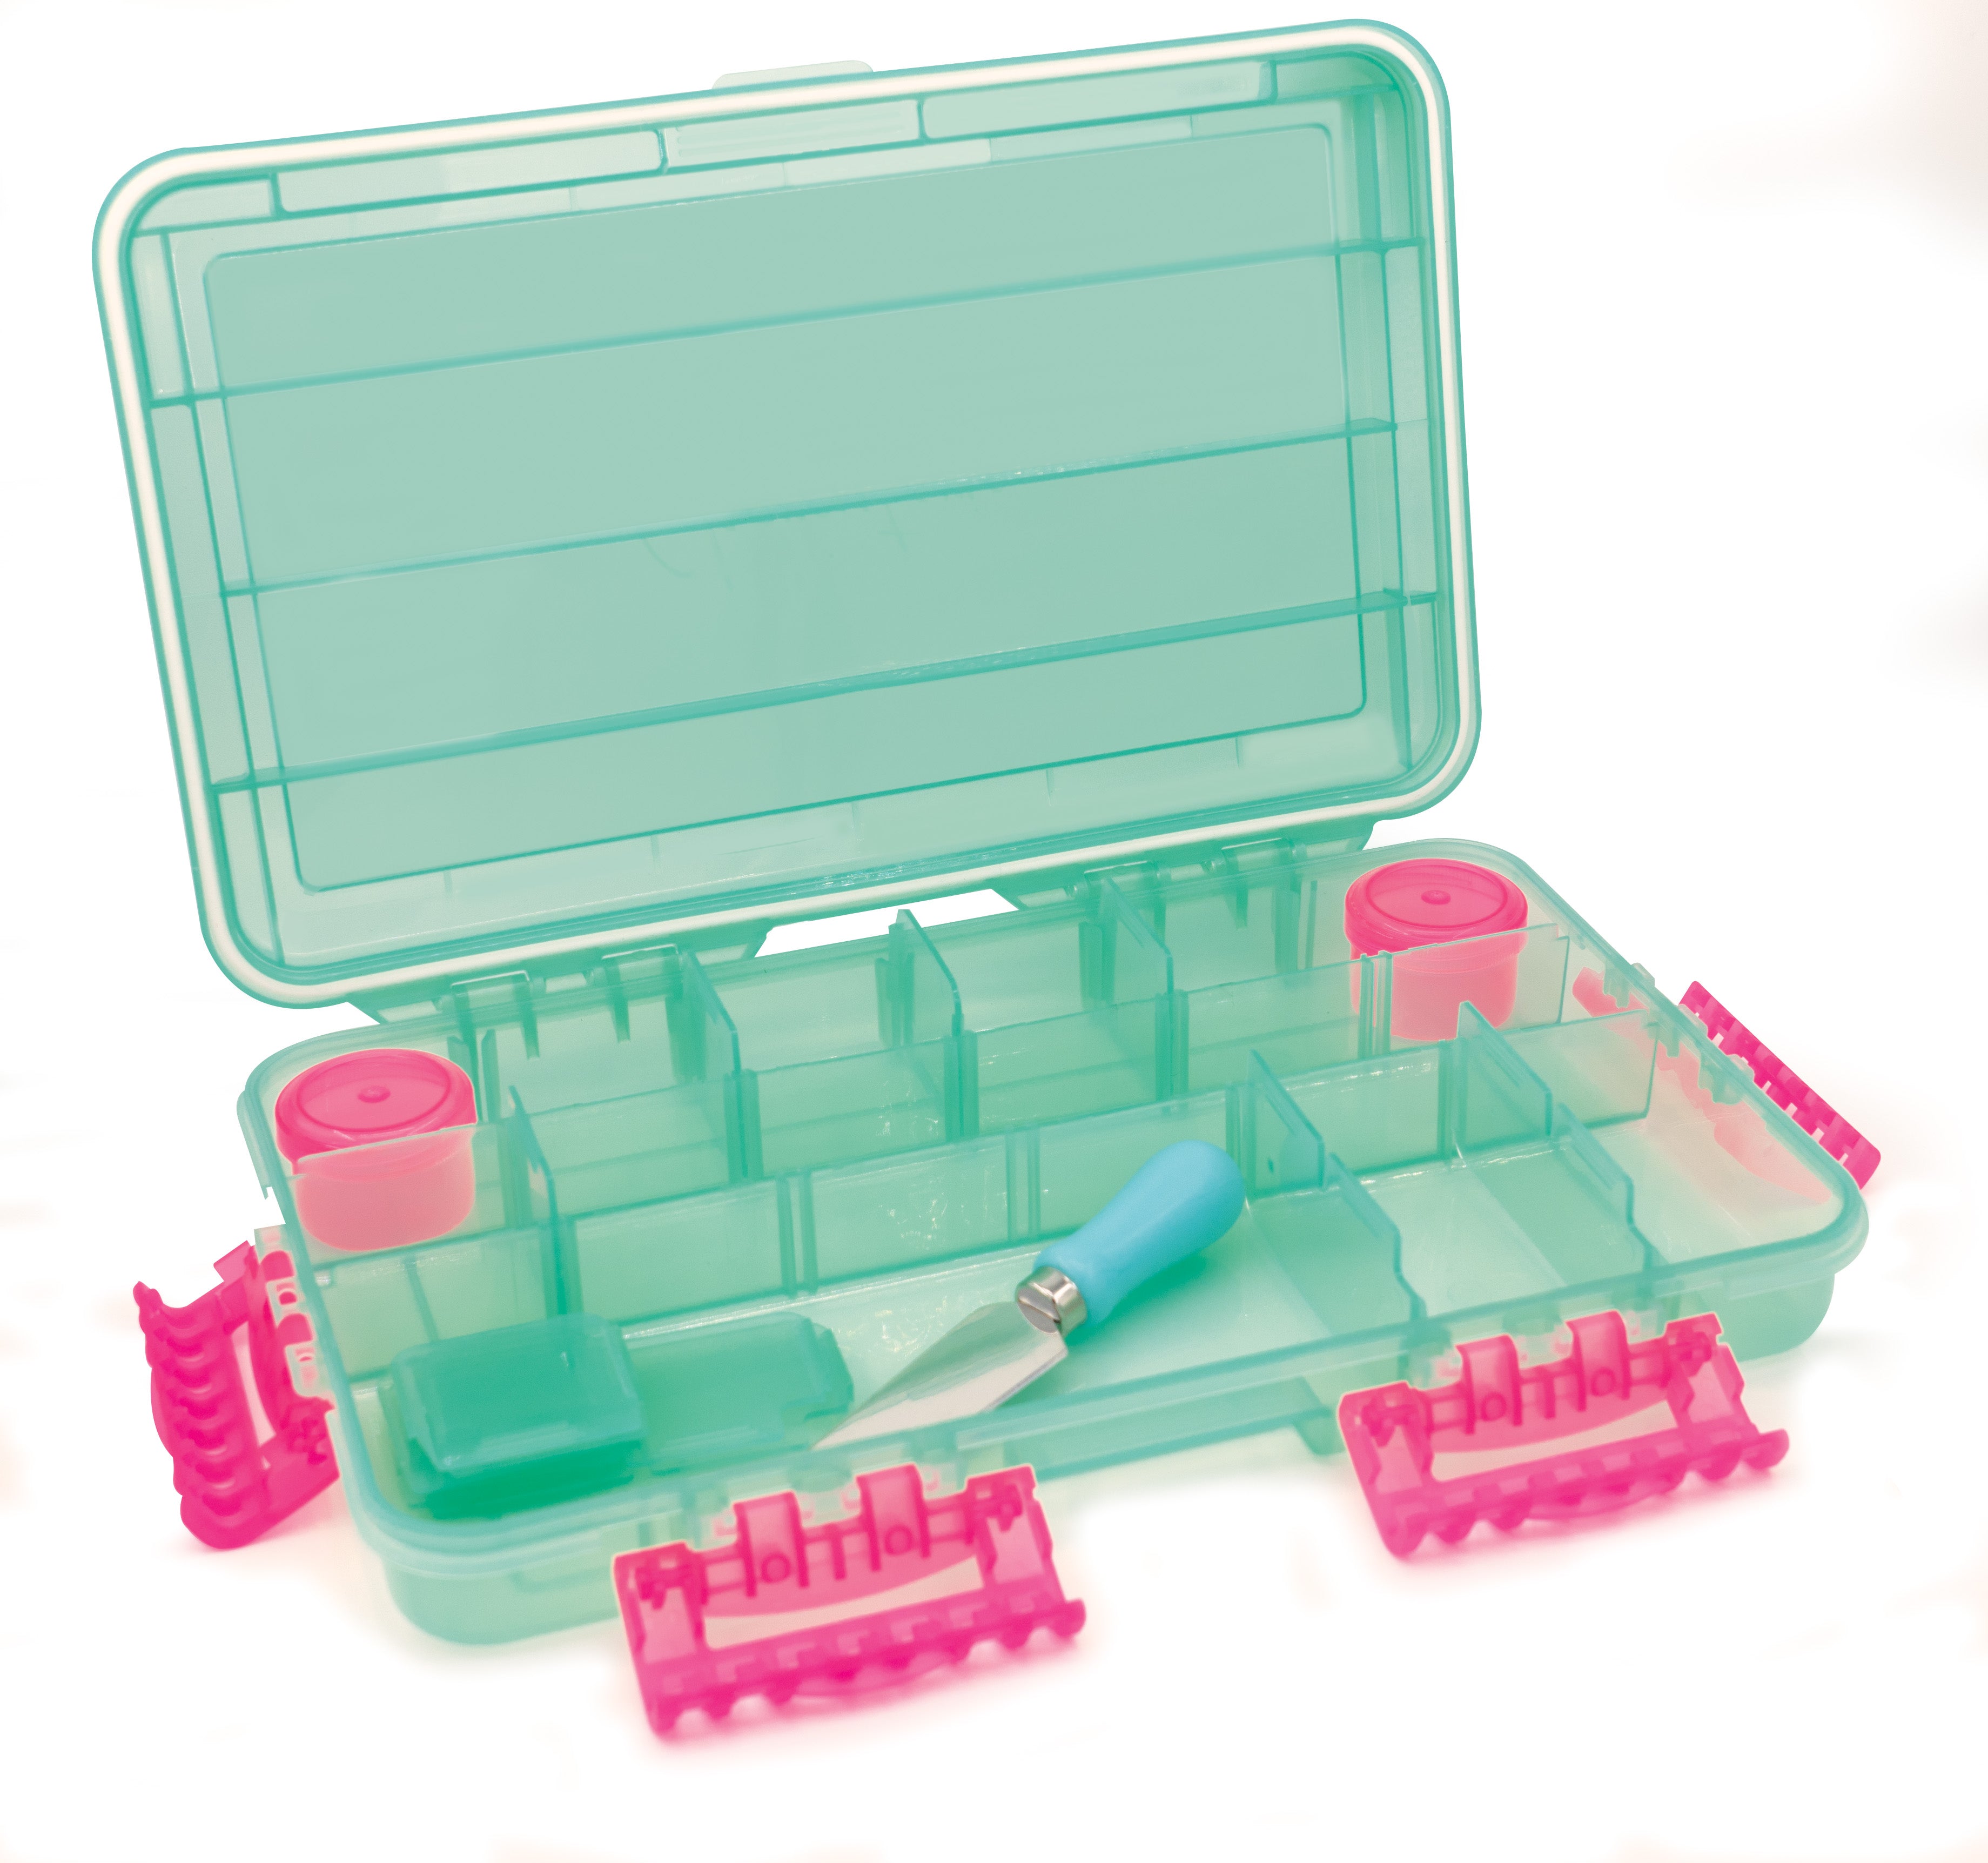 Charcuterie Safe By SubSafe - Waterproof Tackle Box Container